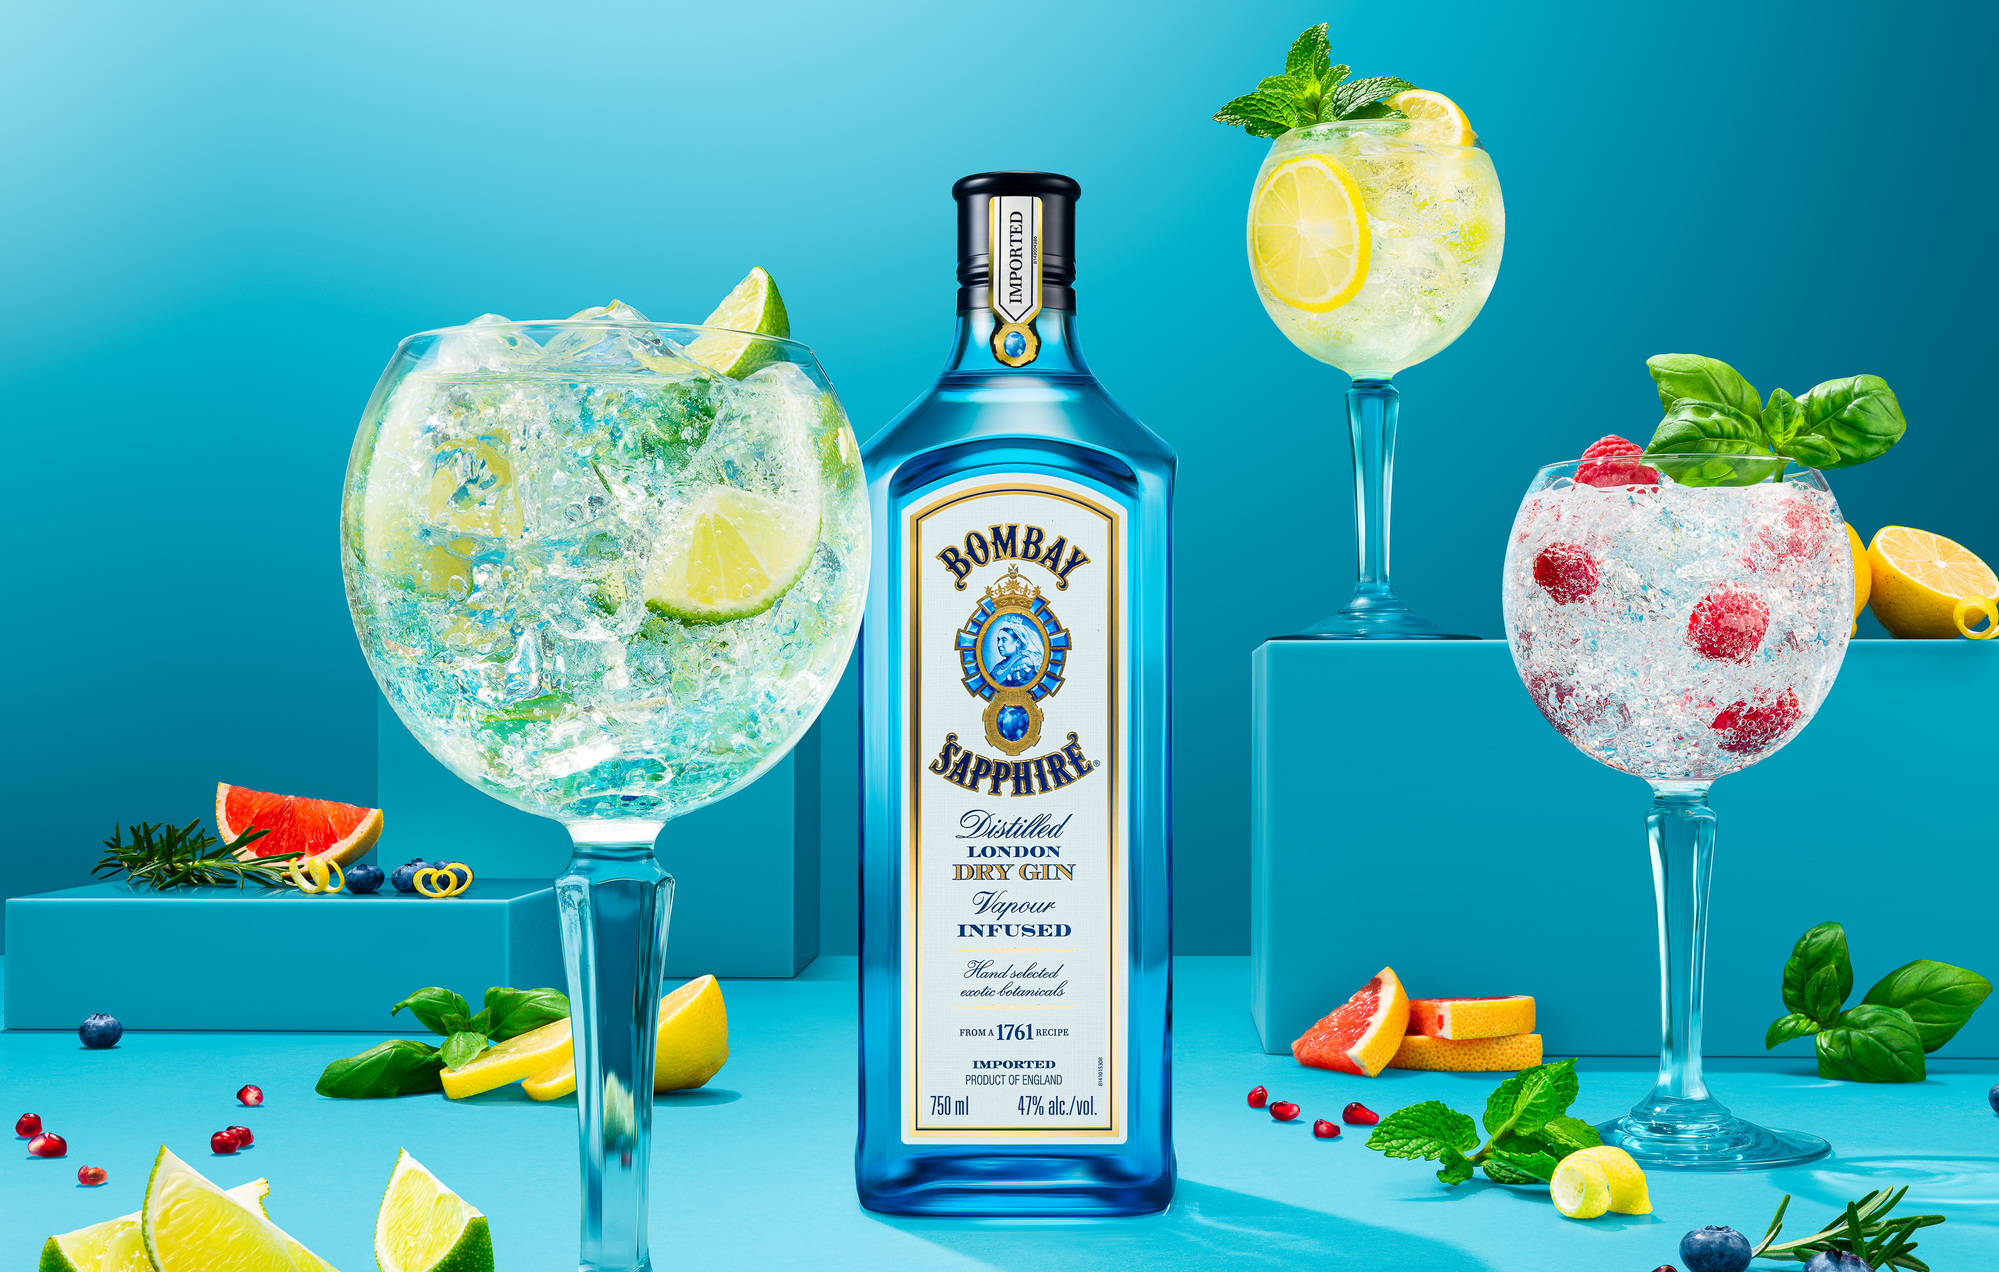 Bombay Sapphire gin cocktails & bottle. Beverage product and advertising photography by Timothy Hogan in Los Angeles